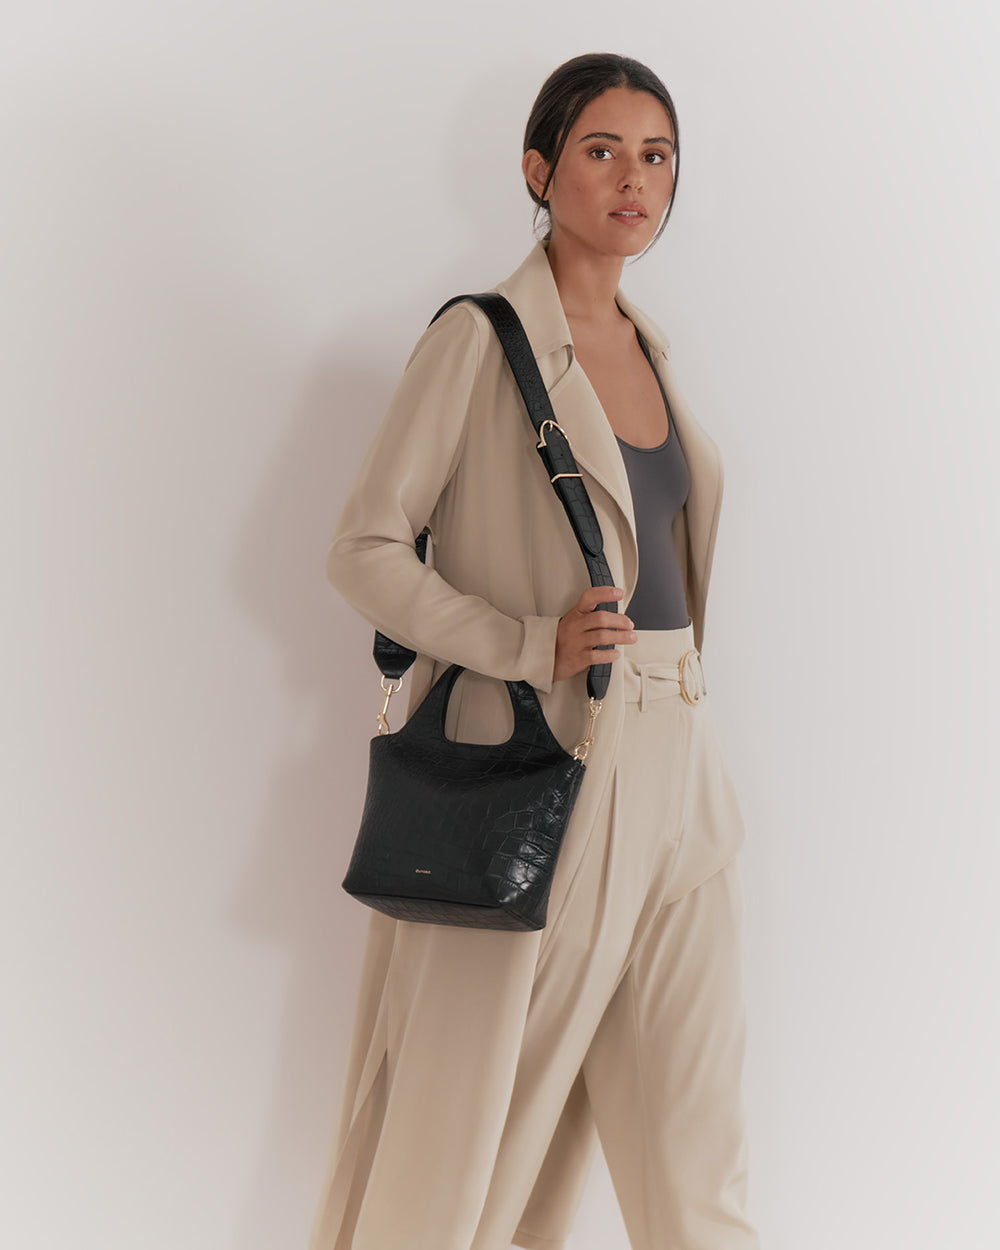 Woman in professional attire carrying a shoulder bag